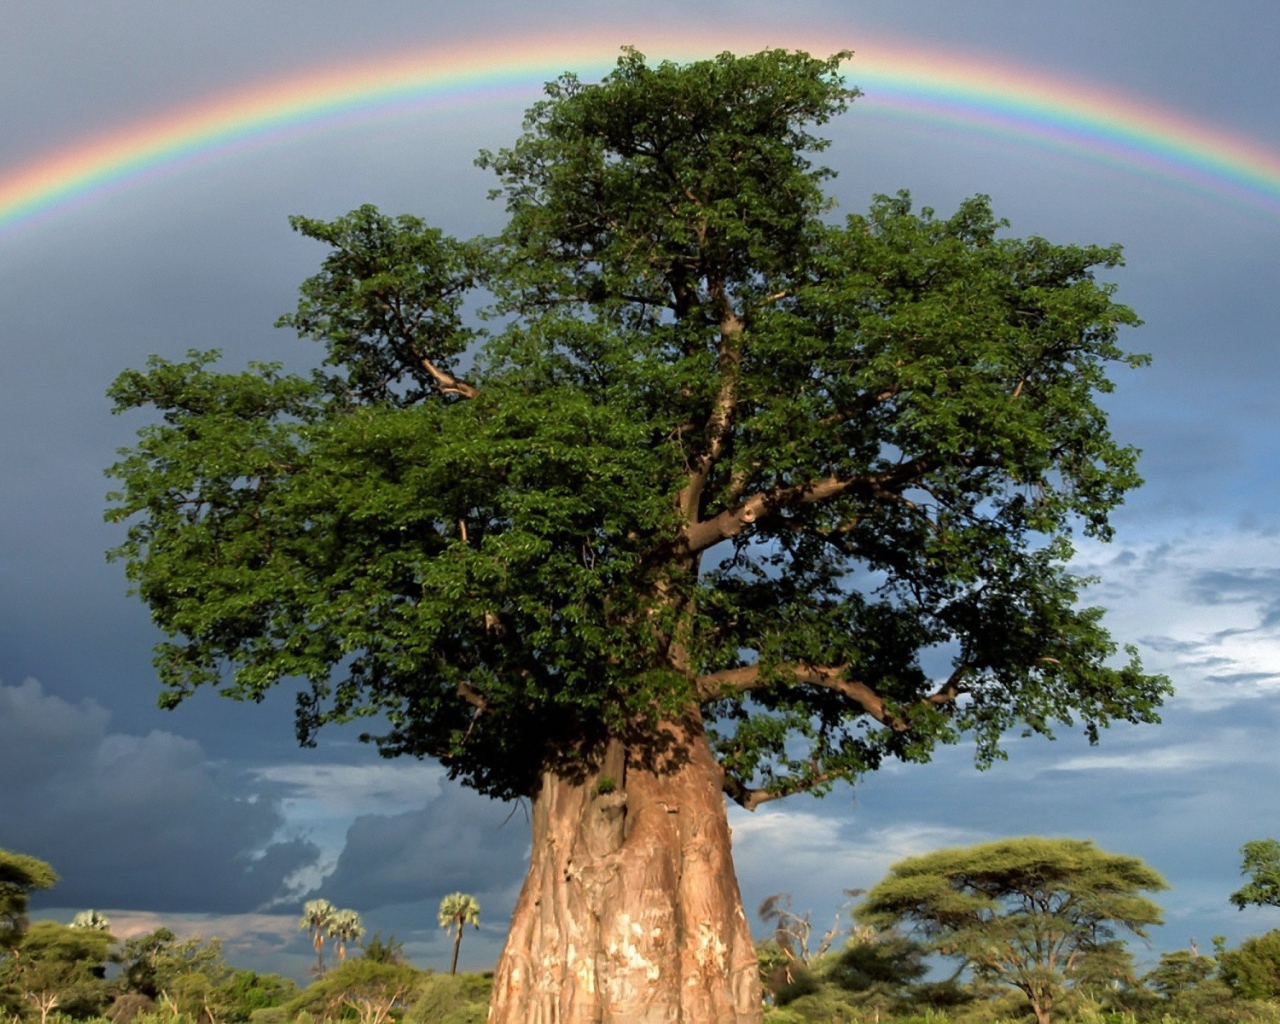 Rainbow over a thick tree